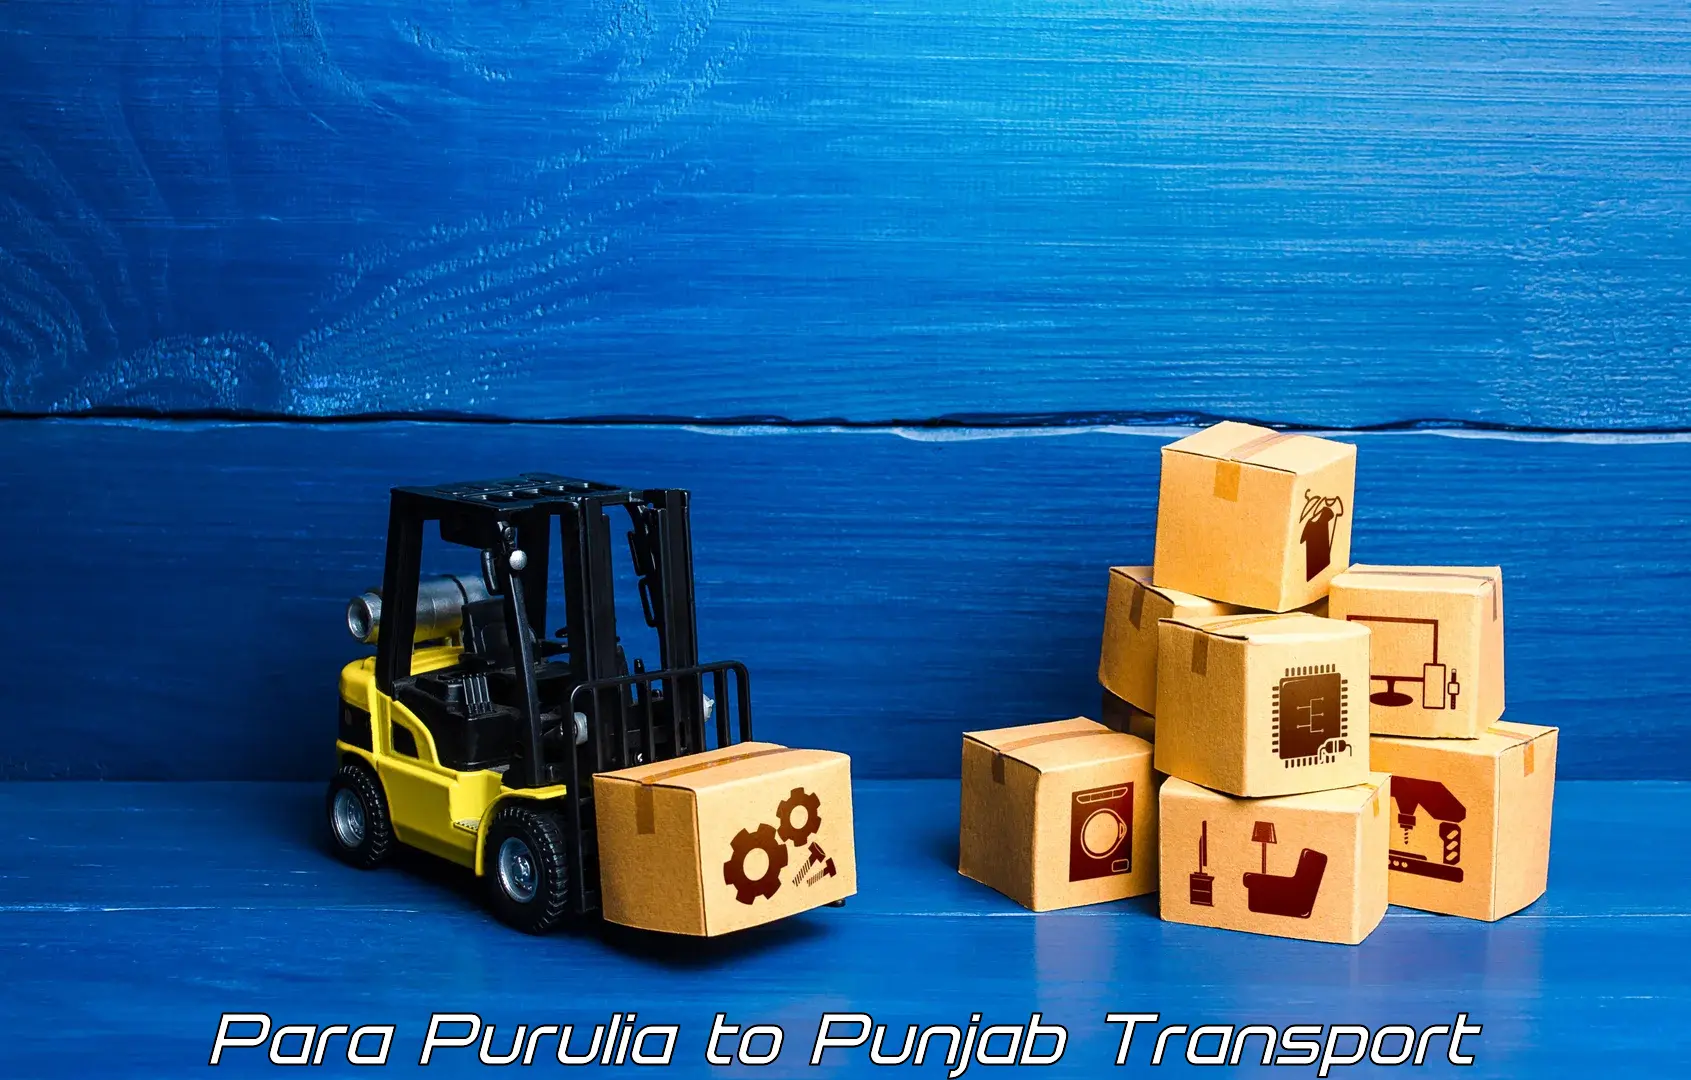 Goods delivery service Para Purulia to Goindwal Sahib